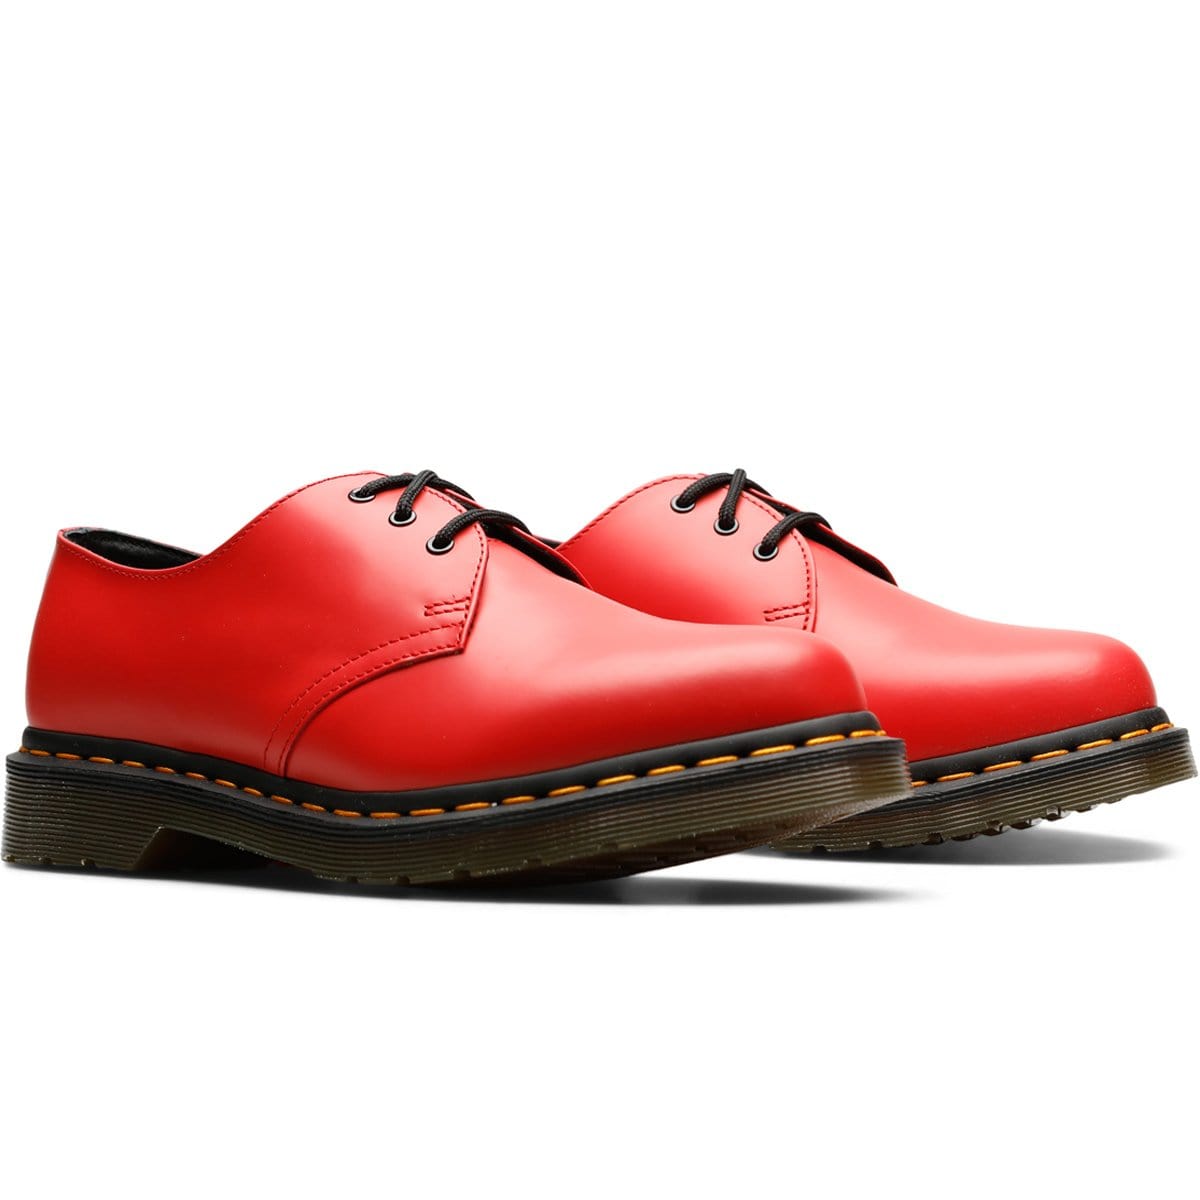 Dr. Martens Shoes 1461 SMOOTH